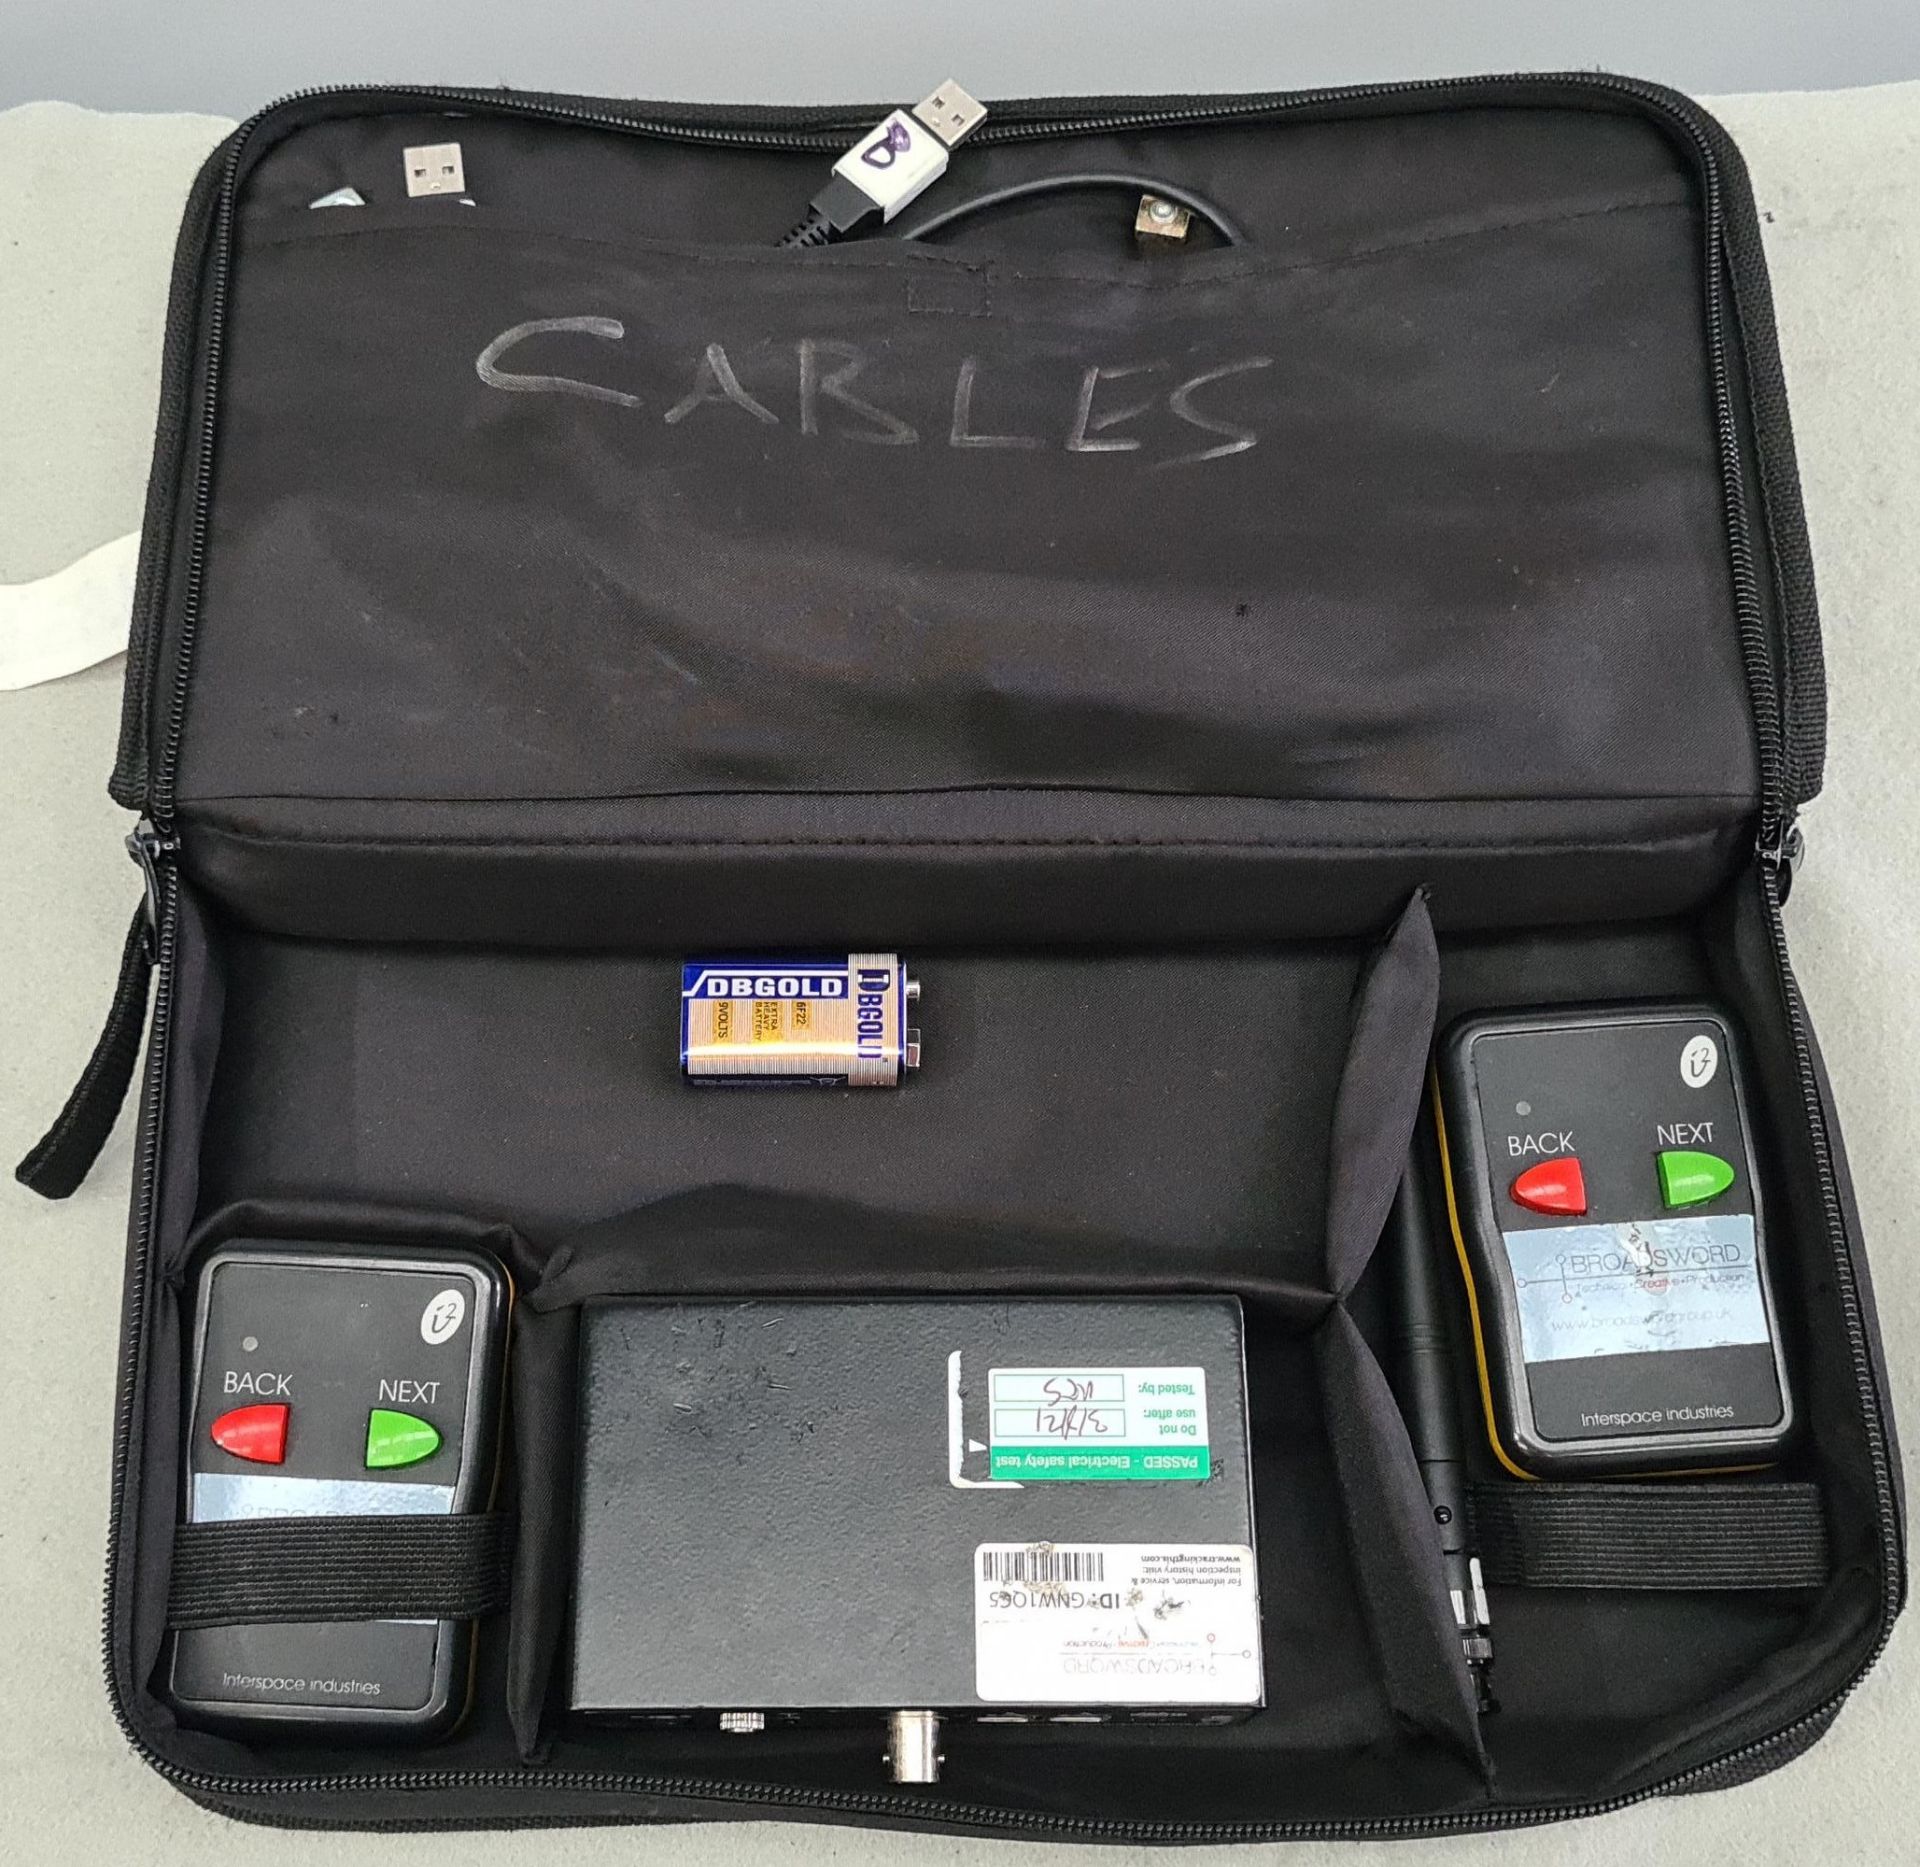 An Interspace Industries MicroCue2 Presenter Control with Interspace soft bag, 2 wireless